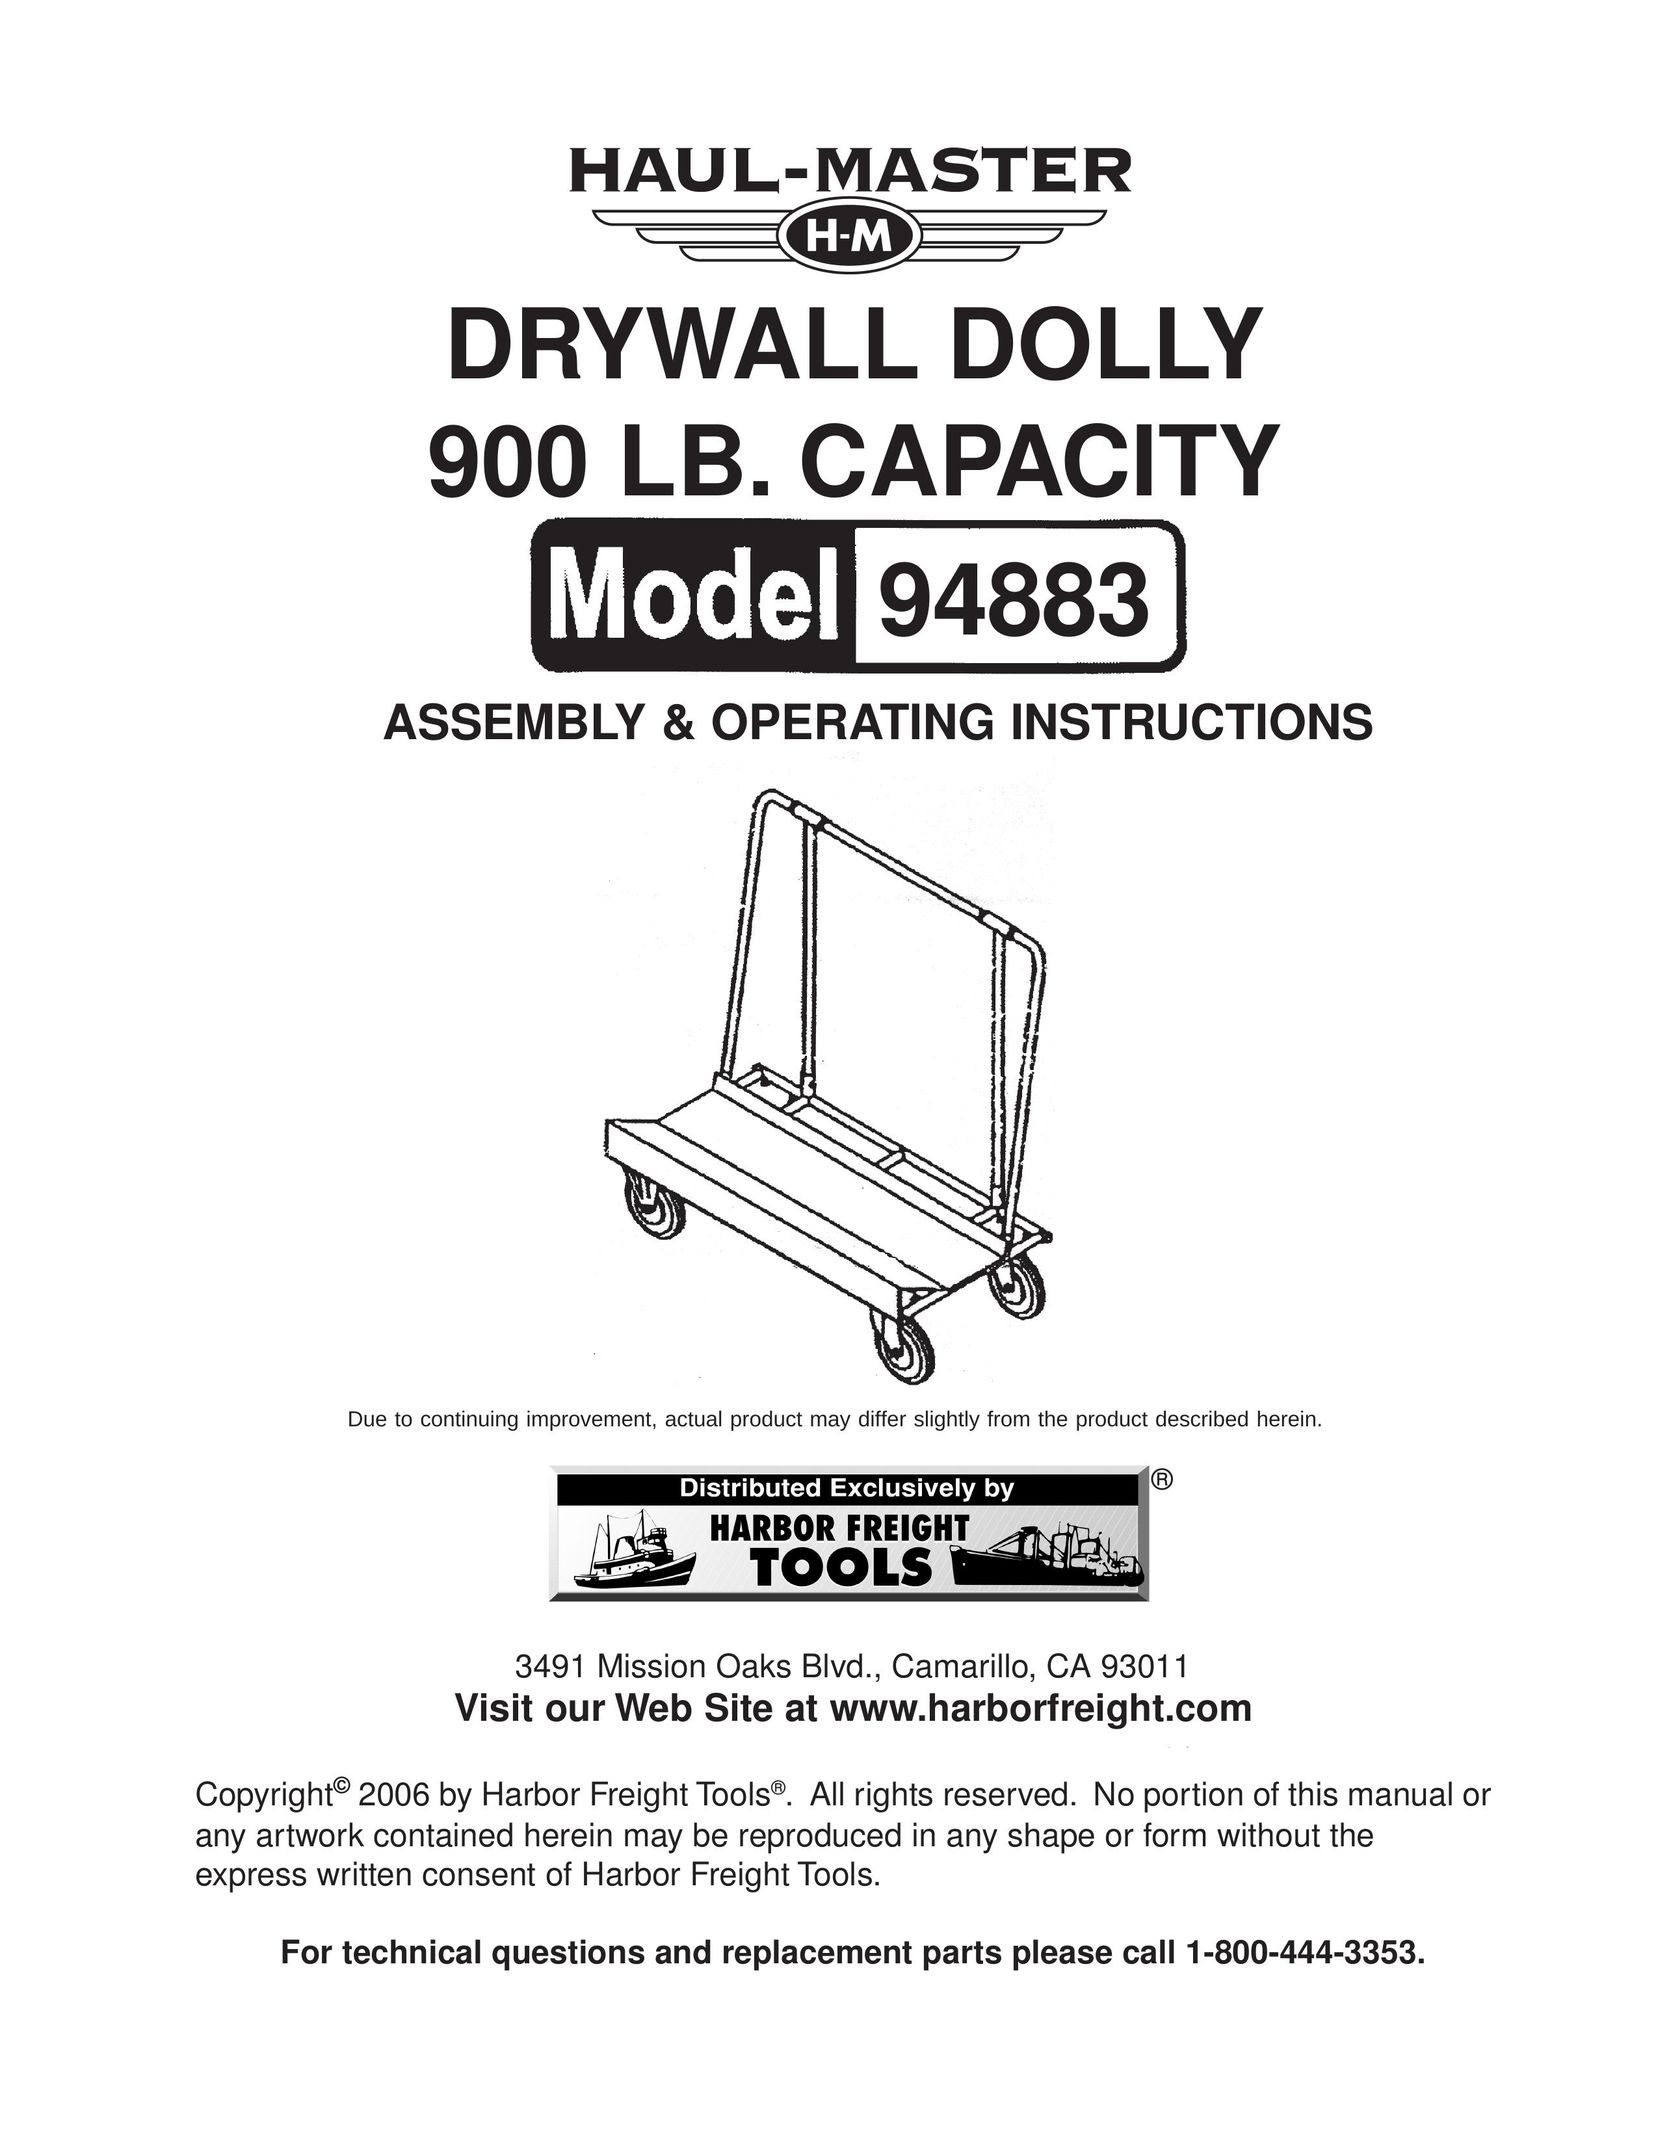 Harbor Freight Tools 94883 Doll User Manual